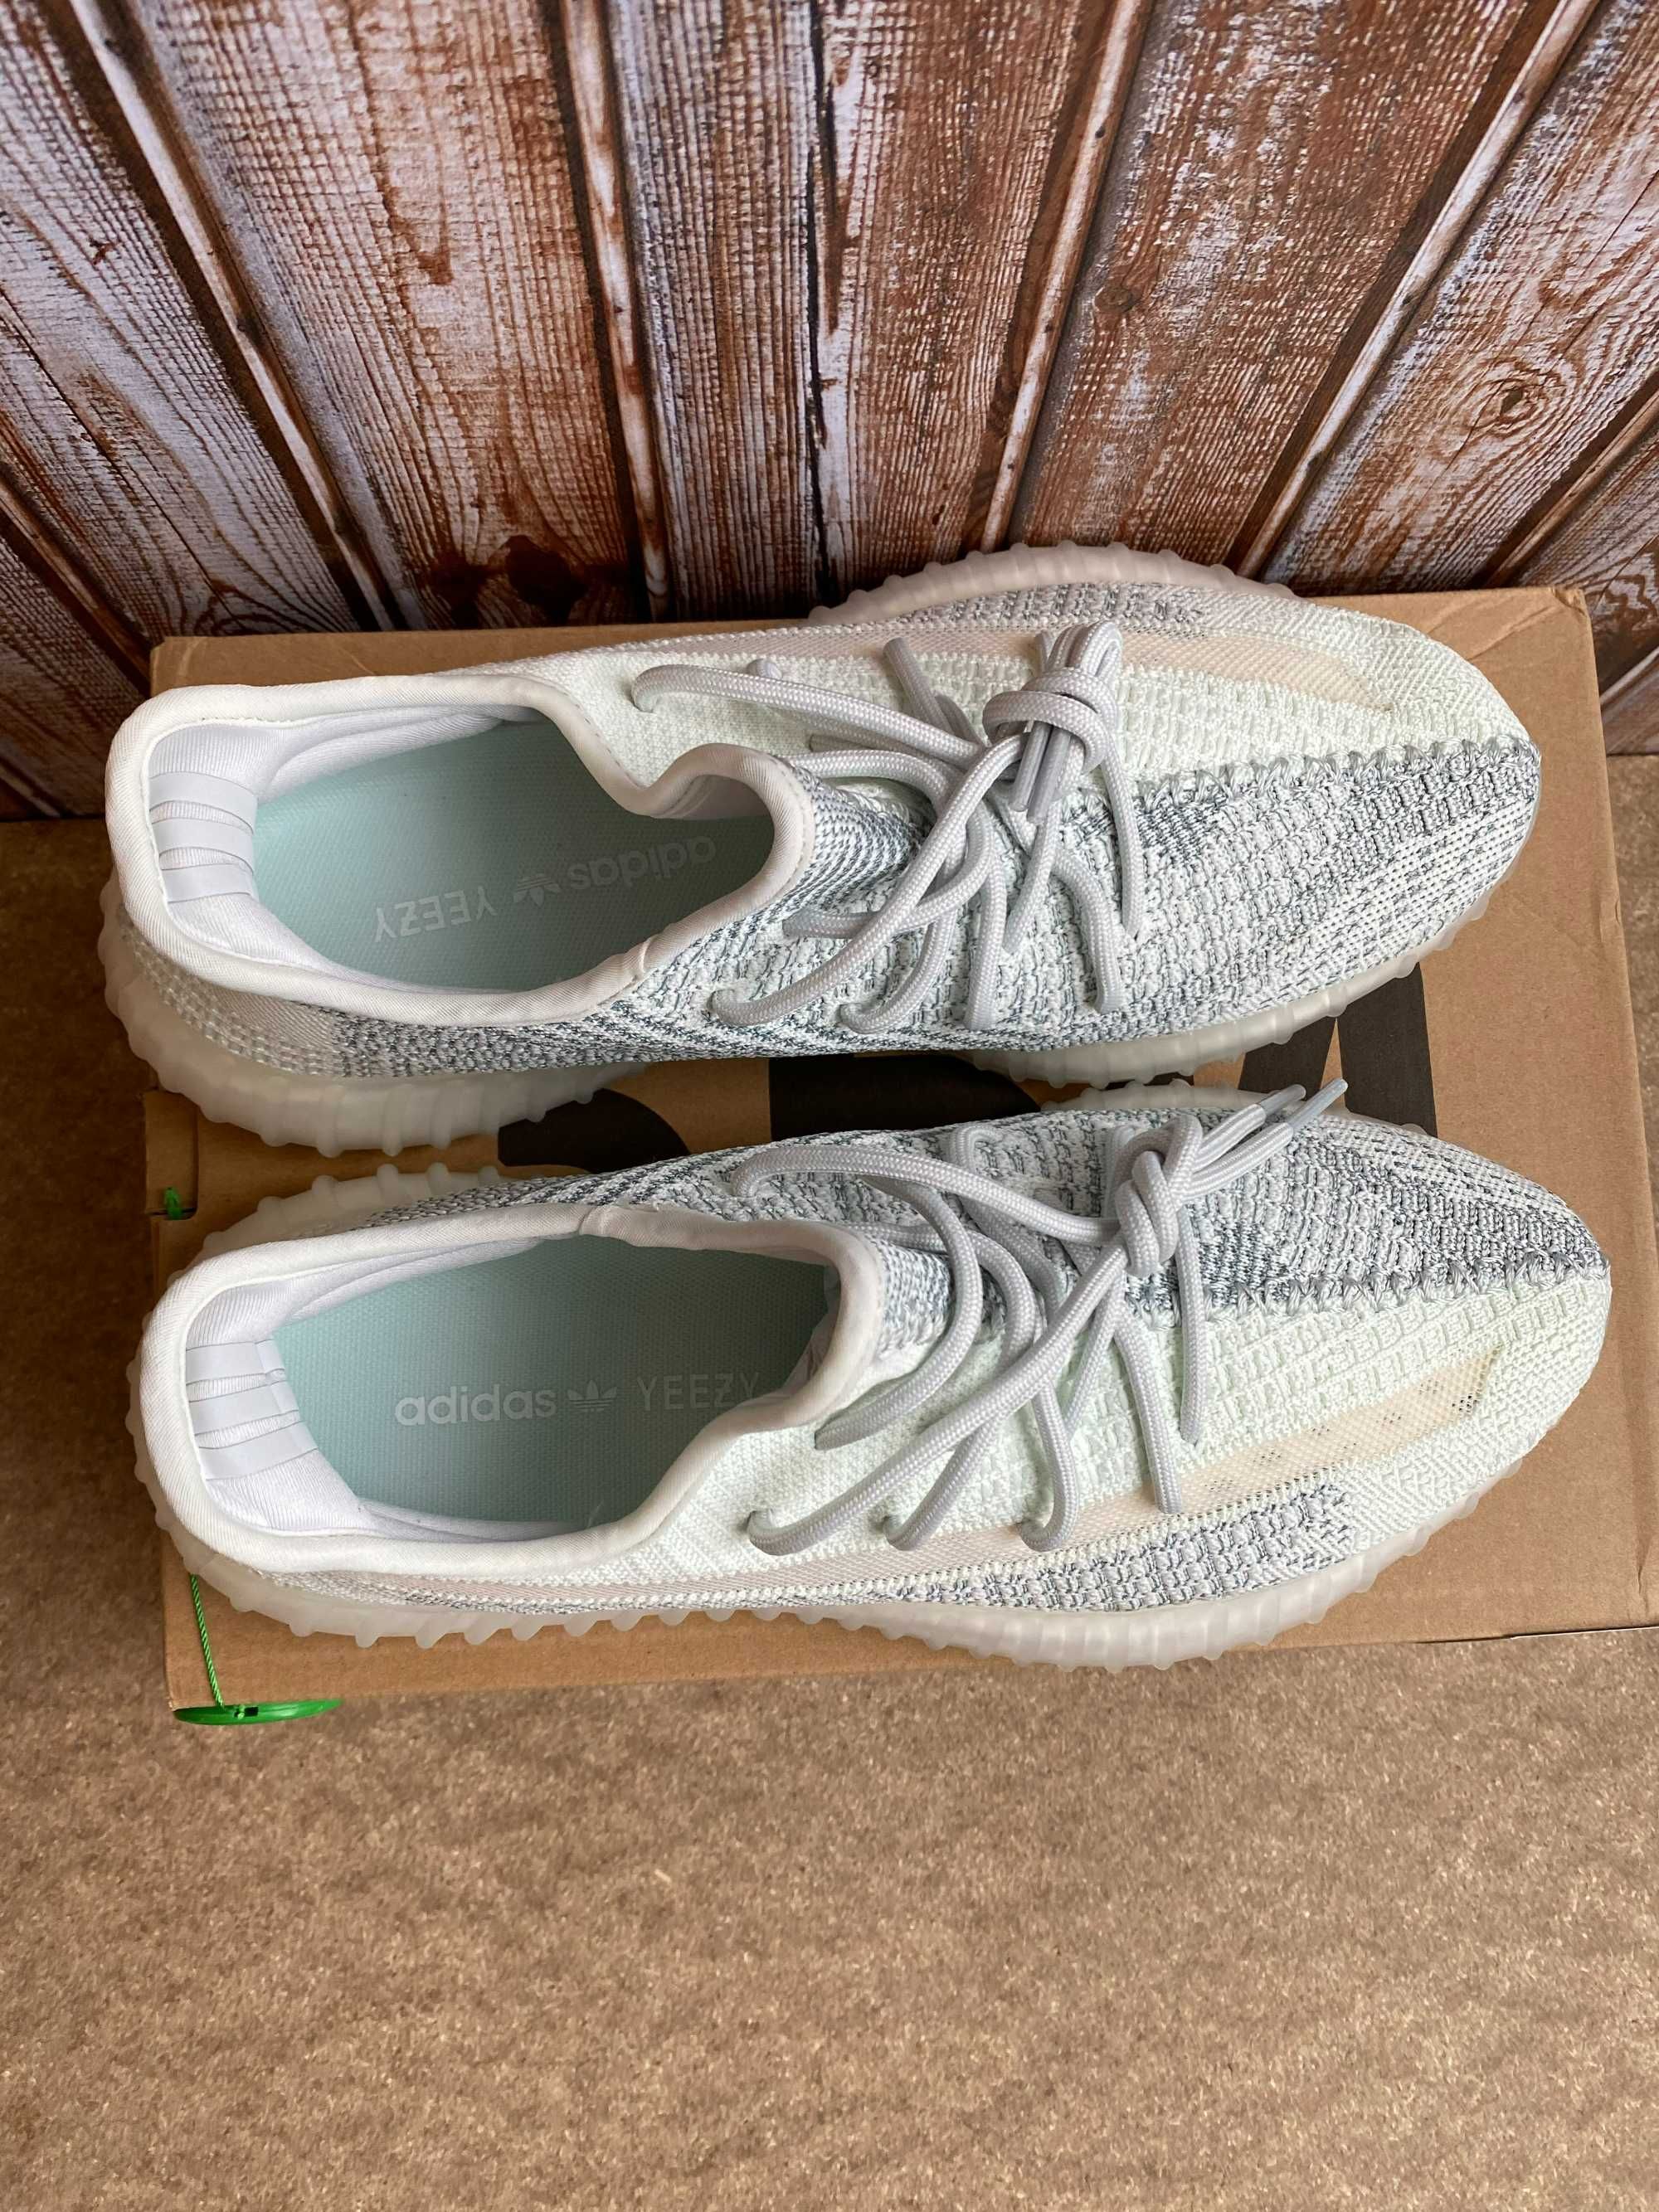 38 41 42 43 Adidas Yeezy Boost 350 v2 Cloud White